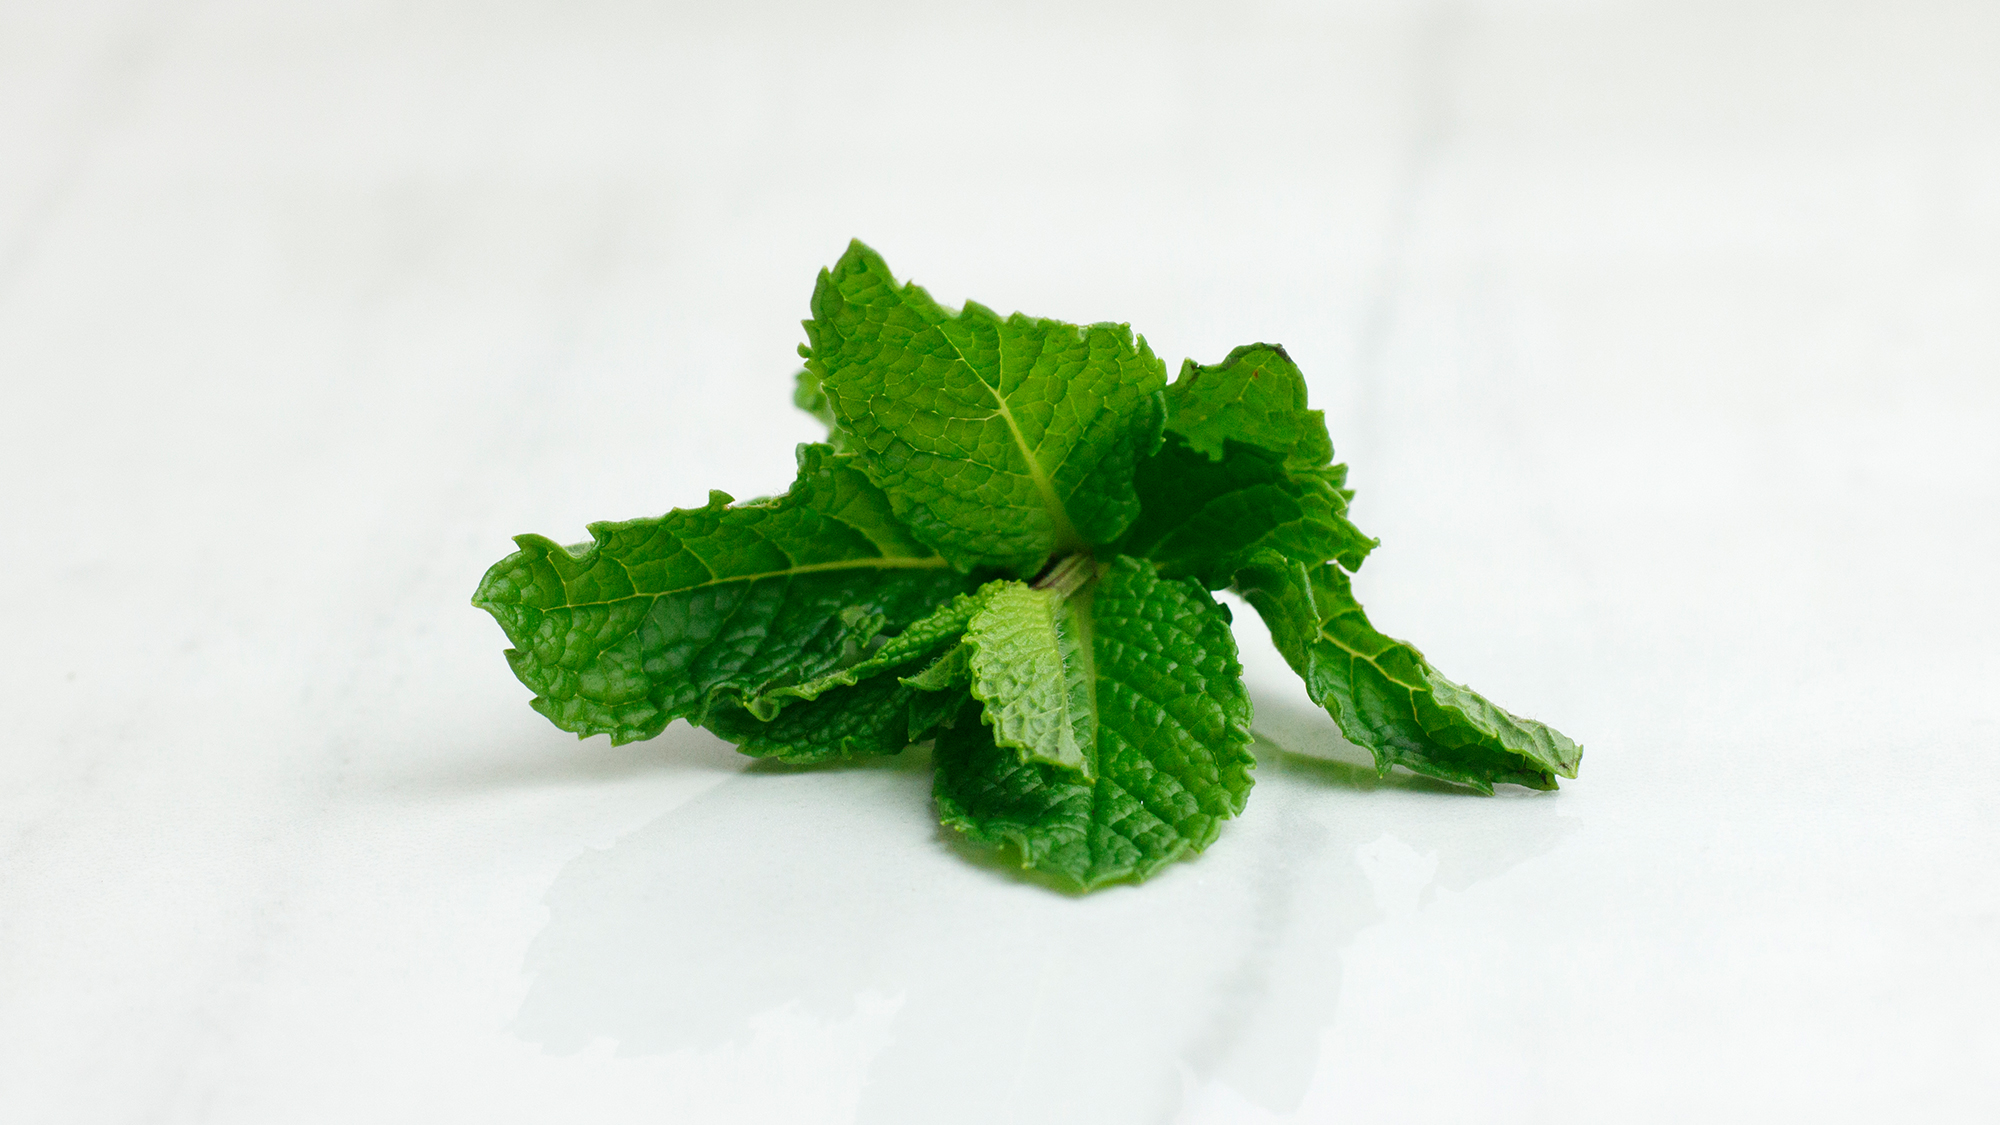 About Mint Uses, Pairings and Recipes